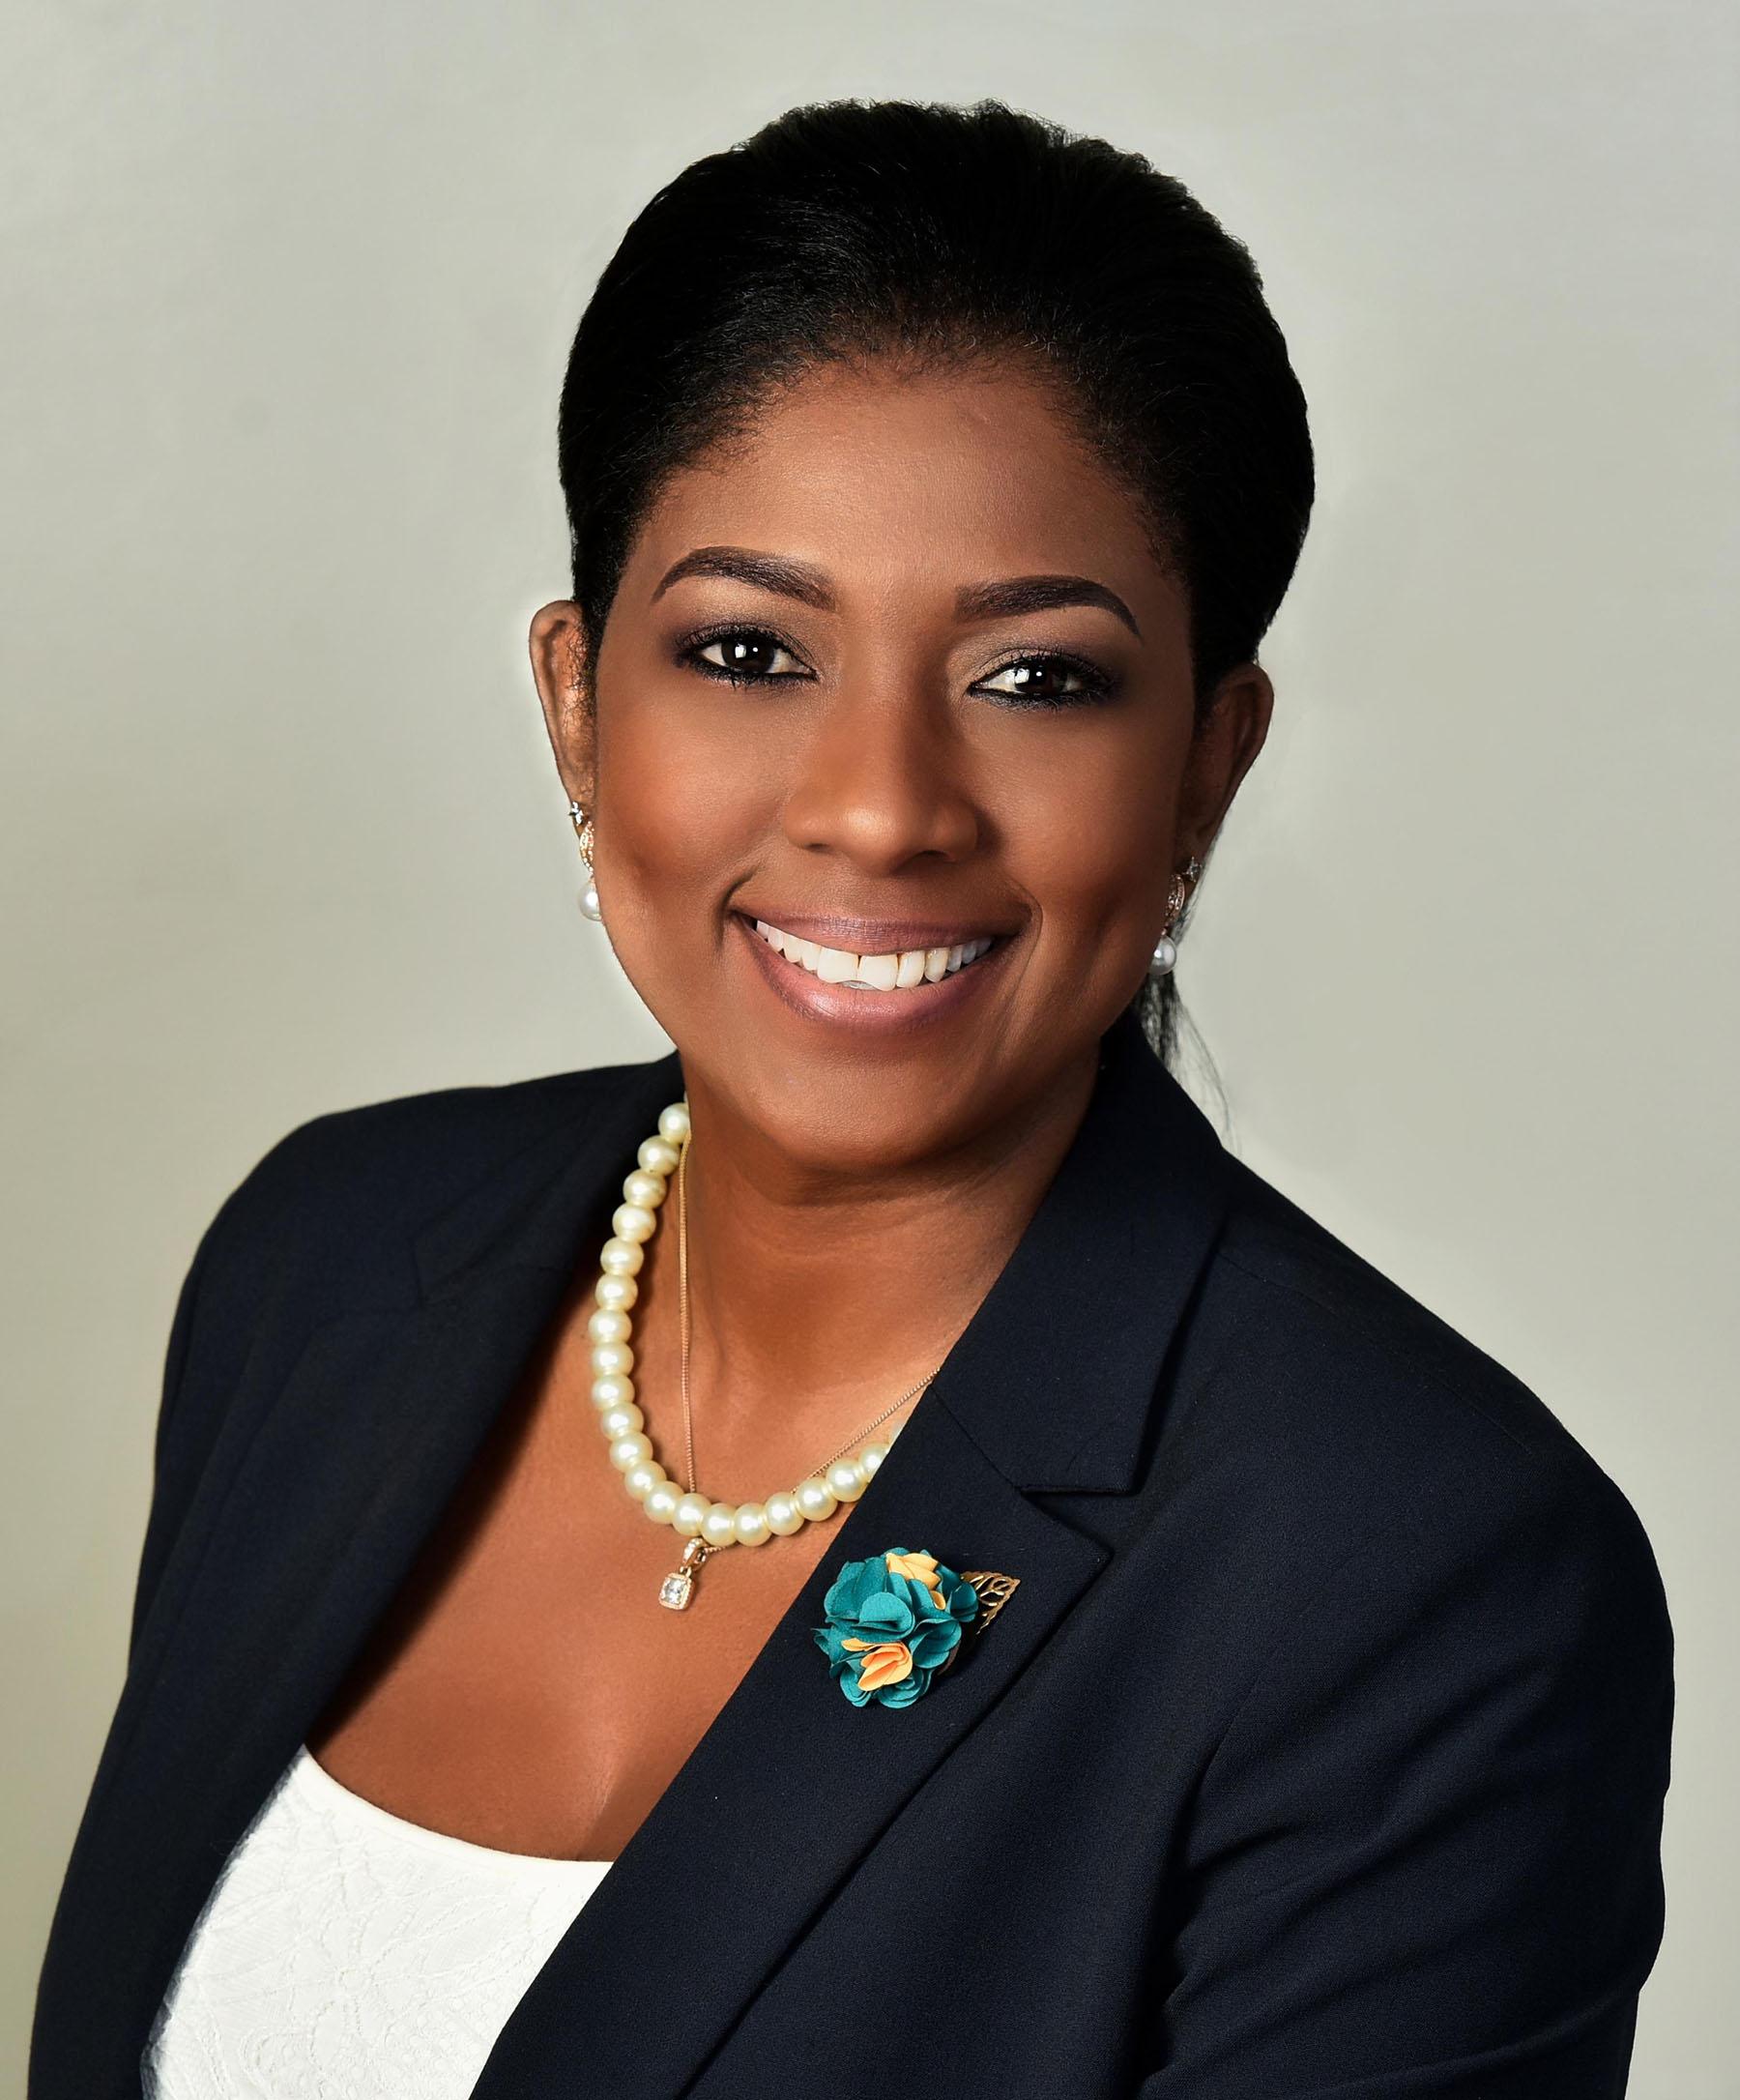 Director General of Tourism, Investments & Aviation, Latia Duncombe